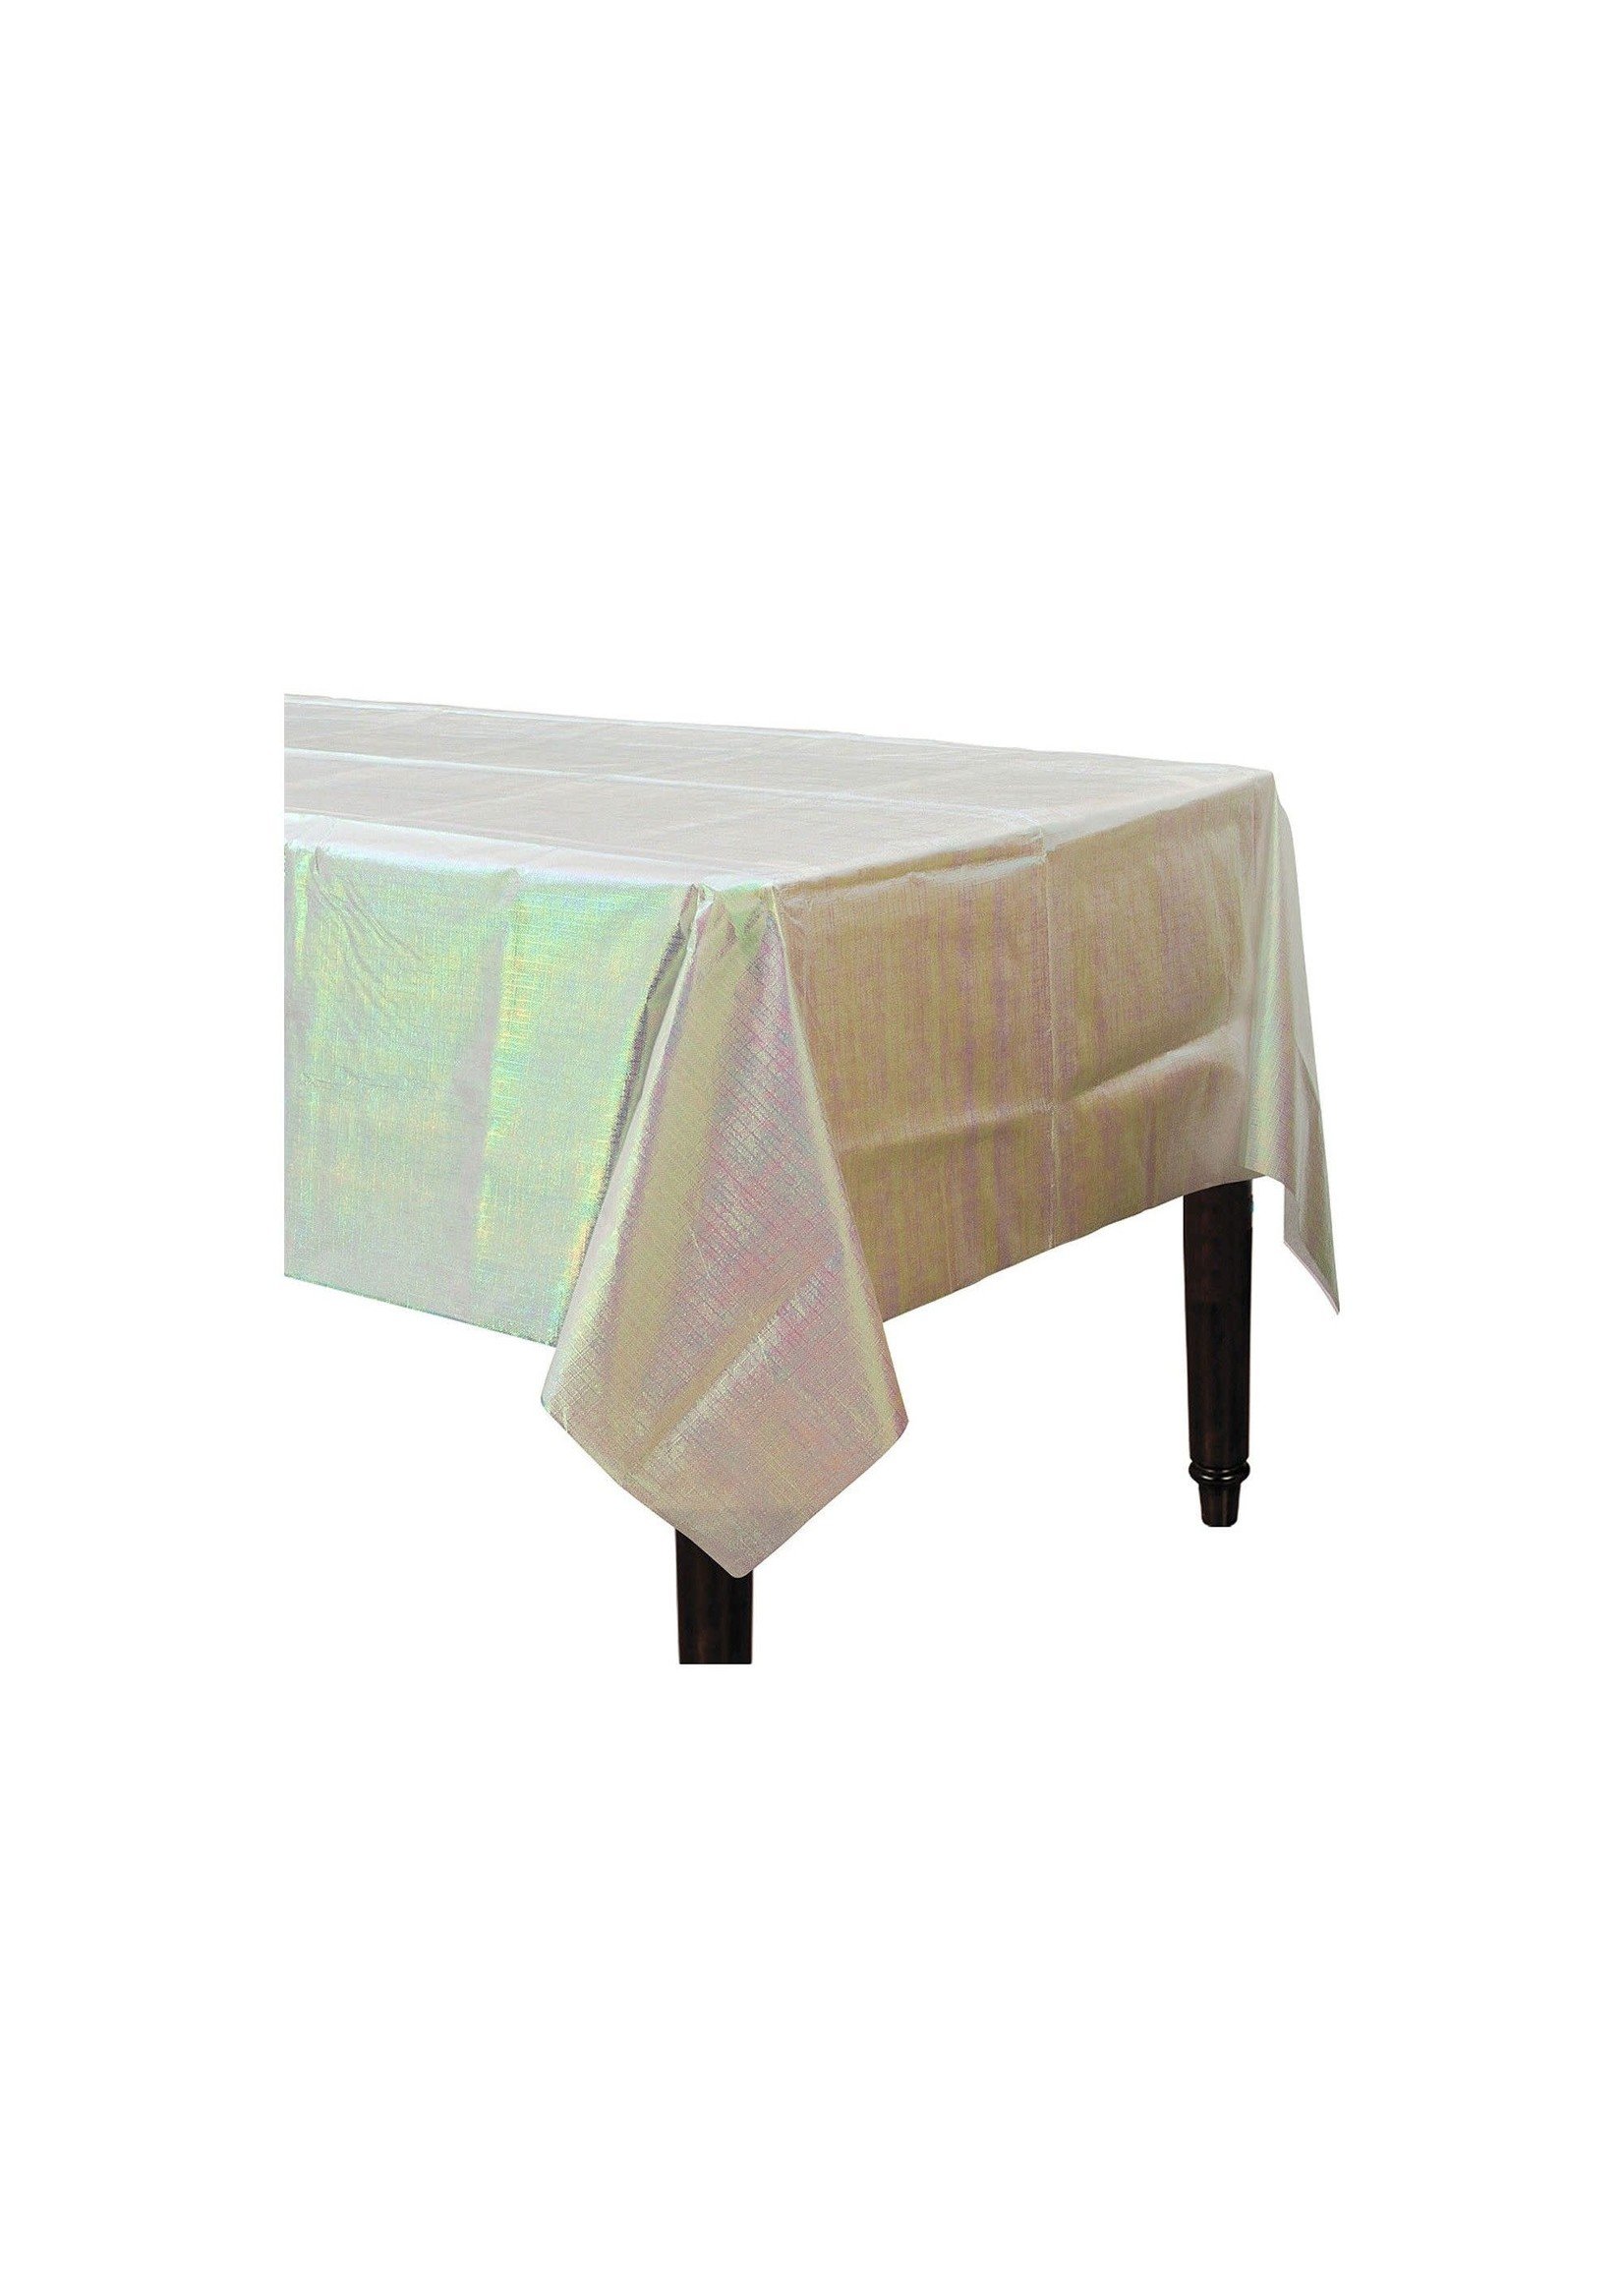 Creative Converting TABLE COVER OPAL WHITE